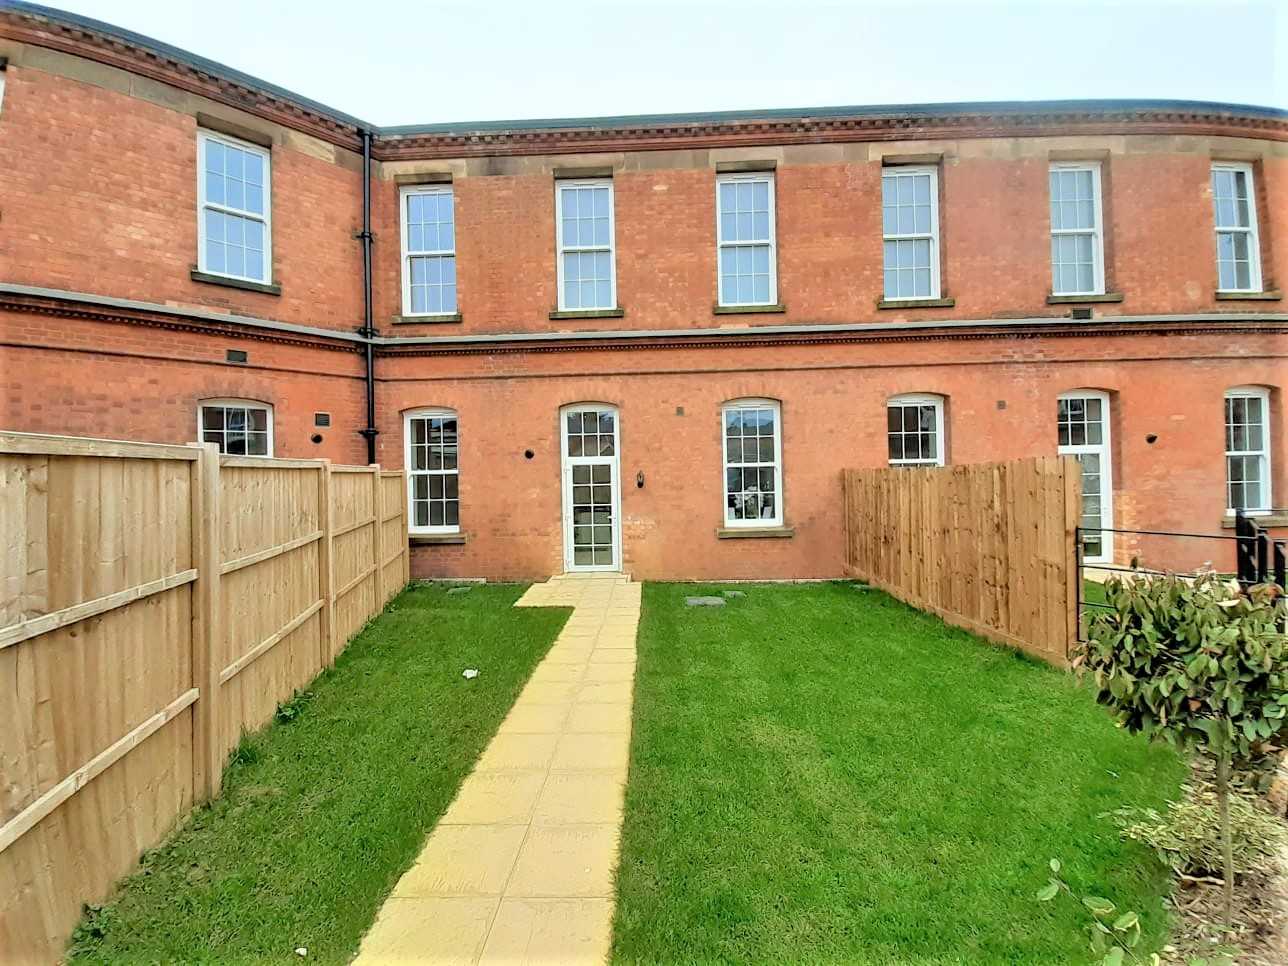 Huis in Humberstone, Leicester 10086294